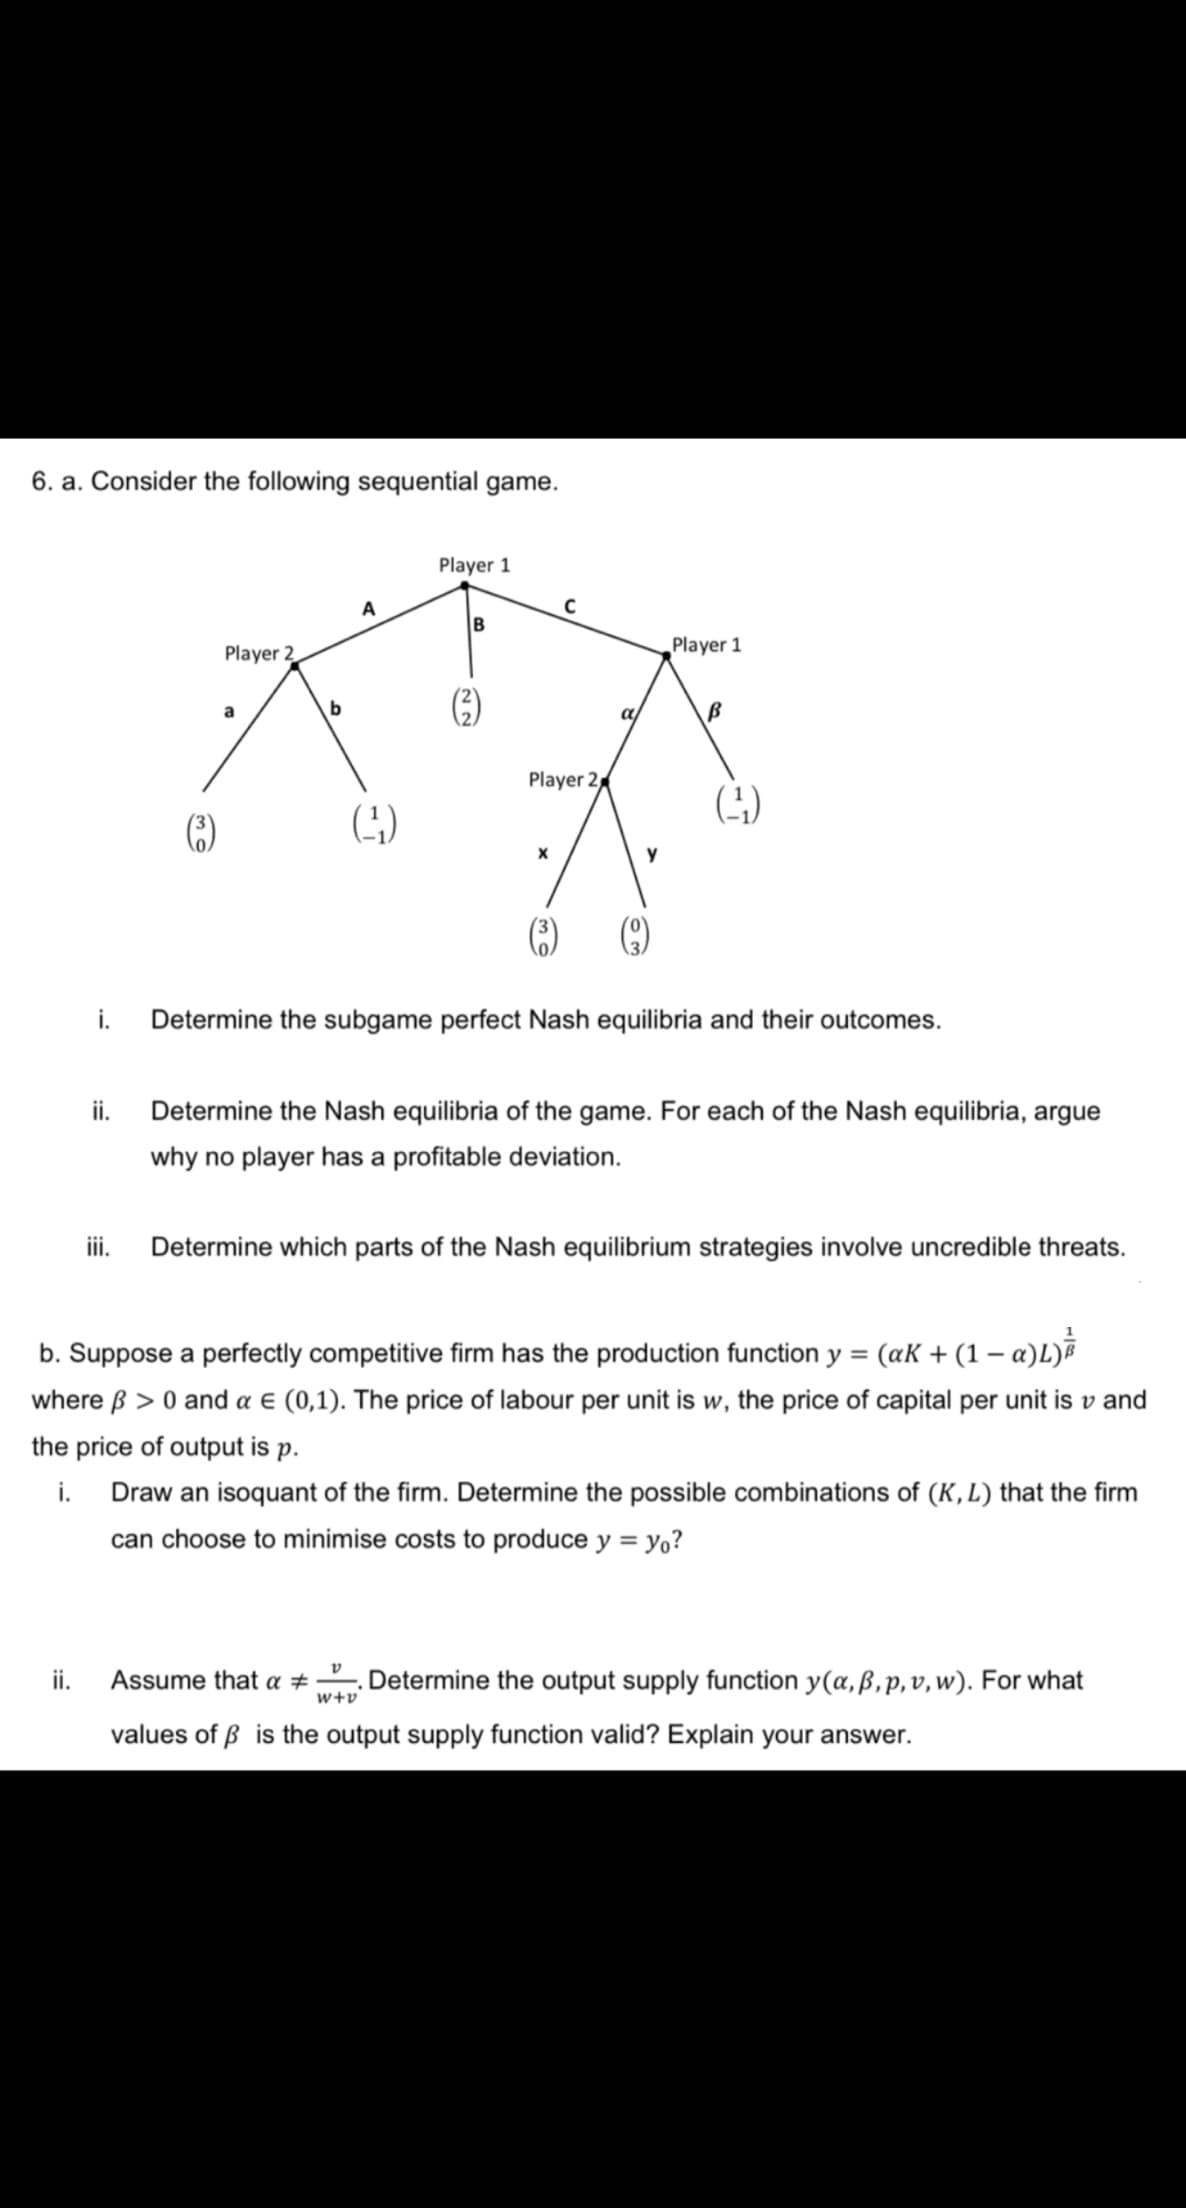 6. a. Consider the following sequential game.
Player 1
A
Player 2
Player 1
(G)
a
a
Player 2
(4)
y
i.
Determine the subgame perfect Nash equilibria and their outcomes.
ii.
Determine the Nash equilibria of the game. For each of the Nash equilibria, argue
why no player has a profitable deviation.
ii.
Determine which parts of the Nash equilibrium strategies involve uncredible threats.
b. Suppose a perfectly competitive firm has the production function y = (aK + (1 – a)L)
where ß > 0 and a € (0,1). The price of labour per unit is w, the price of capital per unit is v and
the price of output is p.
i. Draw an isoquant of the firm. Determine the possible combinations of (K, L) that the firm
can choose to minimise costs to produce y = y,?
ii.
Assume that a #
Determine the output supply function y(a, ß, p, v, w). For what
w+v
values of ß is the output supply function valid? Explain your answer.
